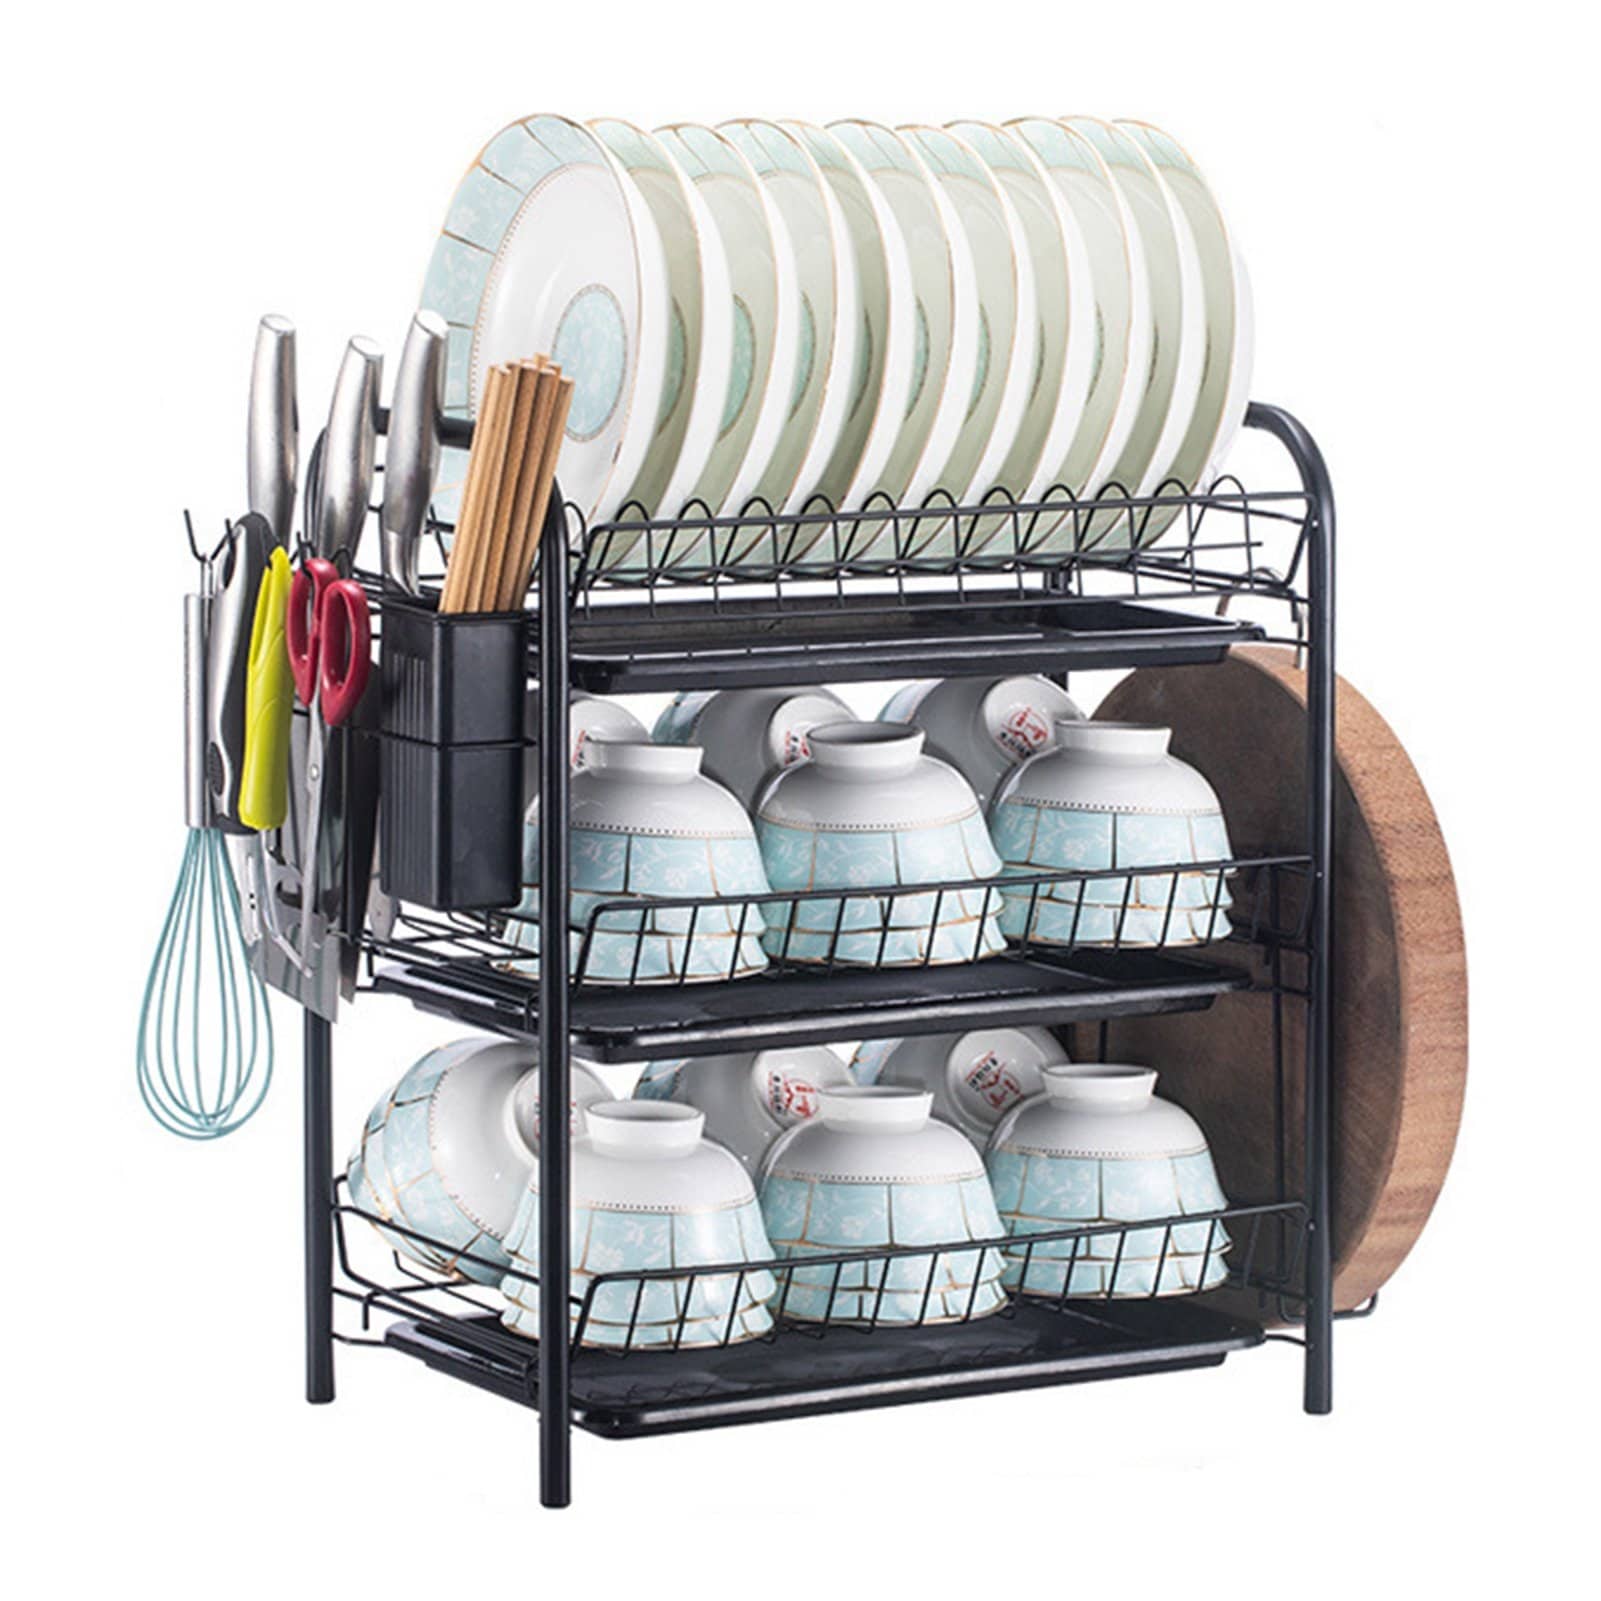 2 Tier Large Dish Drying Rack with Drip Tray, Detachable Dish Drainer Rack  with Swivel Drainage Spout, Cutting-Board Holder, Cup Holder, Organize